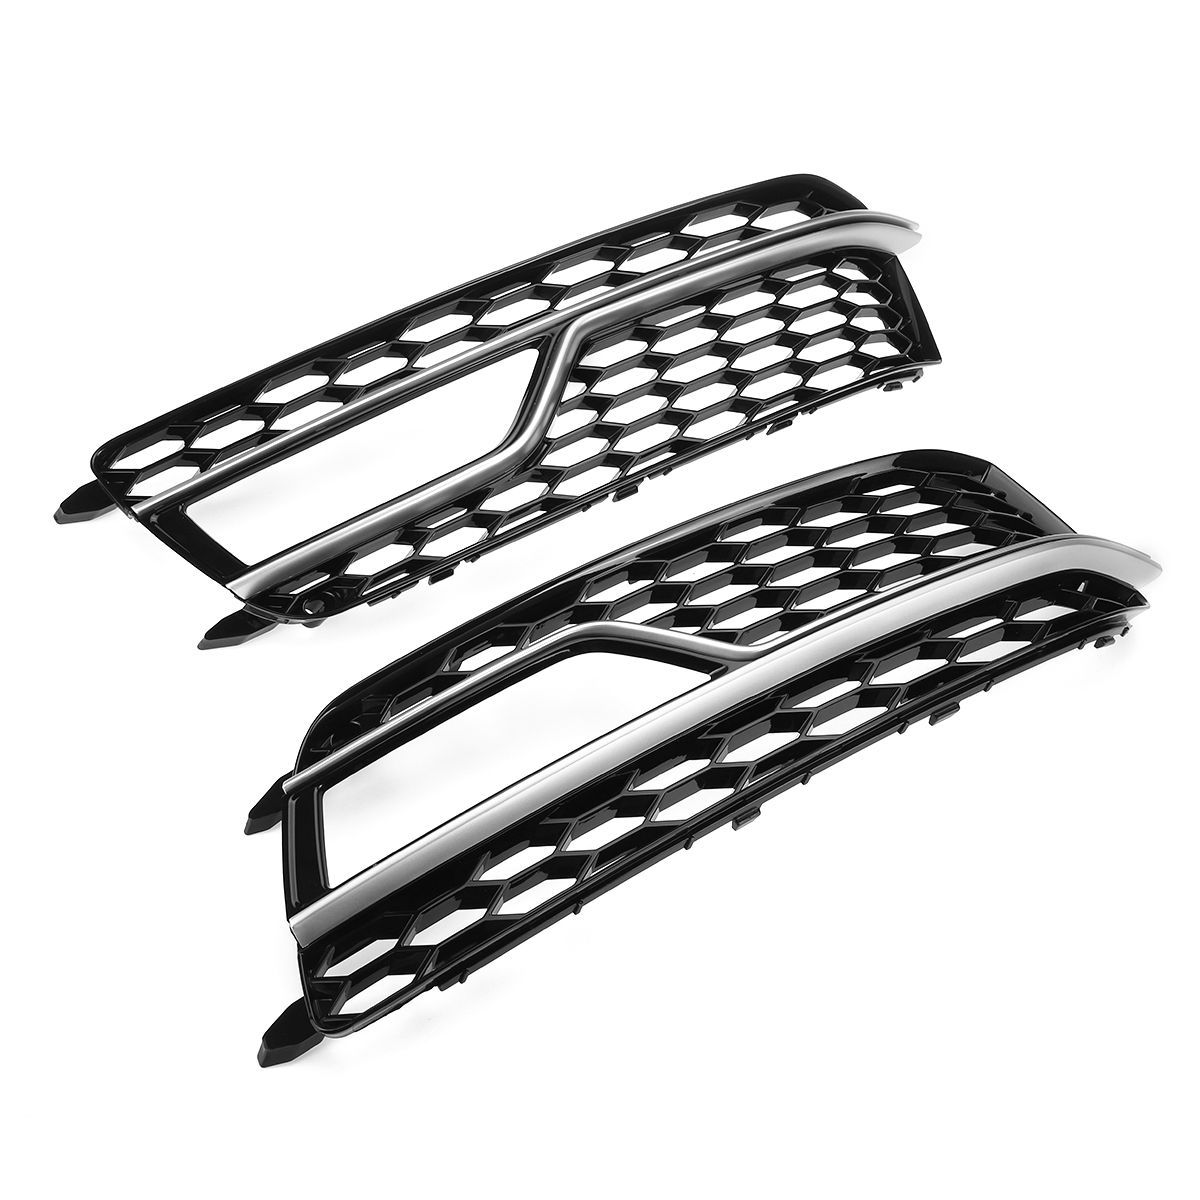 Pair-Front-Bumper-Fog-Light-Grill-Grille-Silver-Trim-For-Adufi-S-Line-A5-S5-2013-2016-1745411